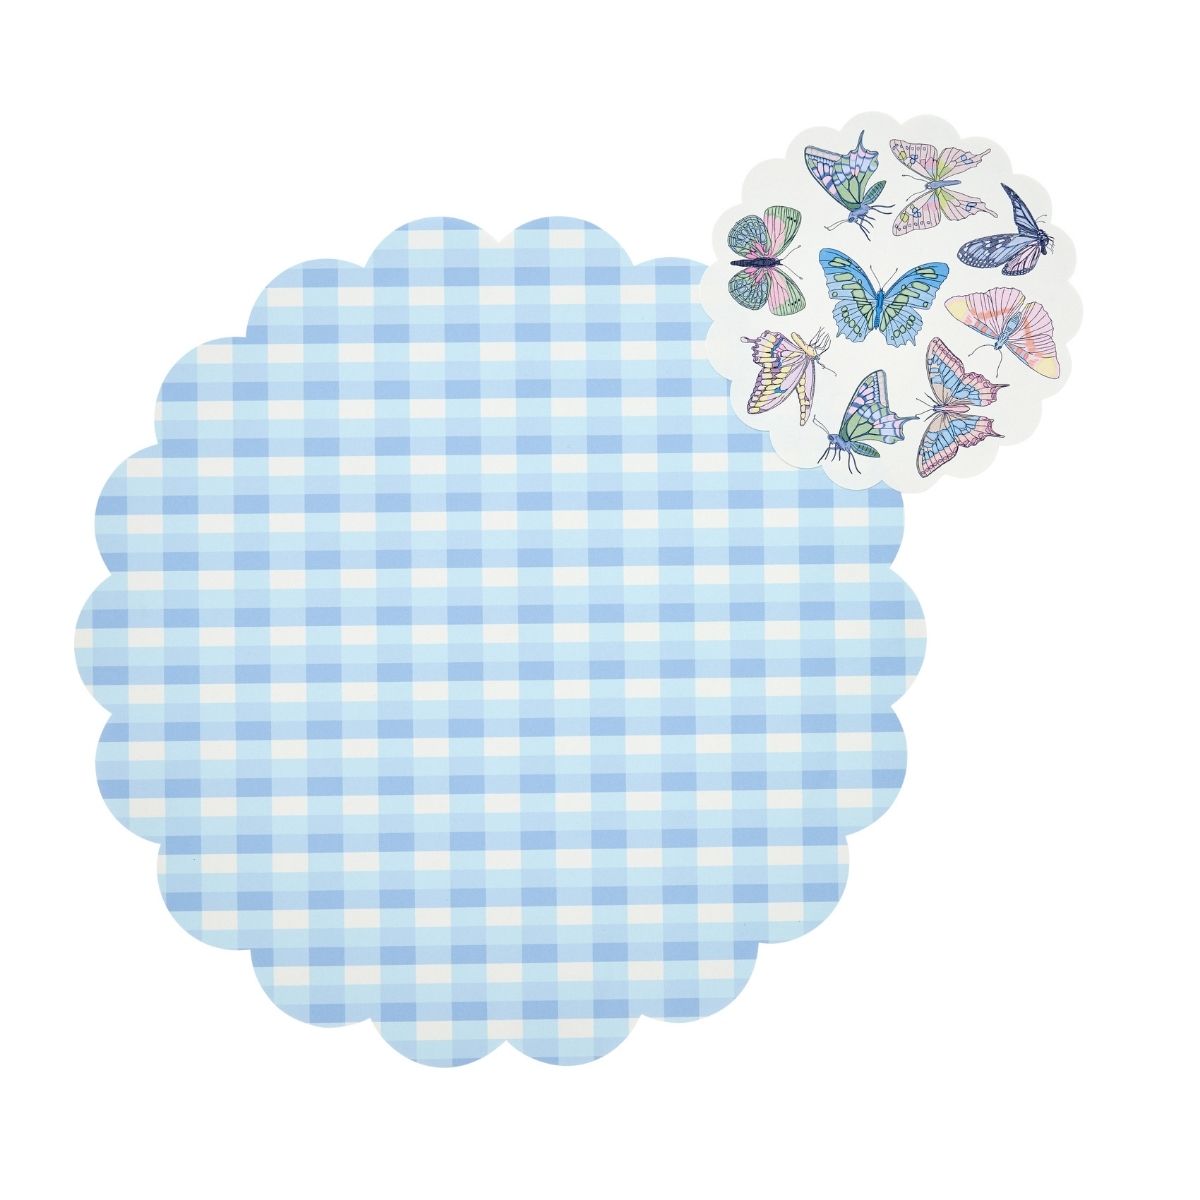 Vichy Check in Blue Doily Sets